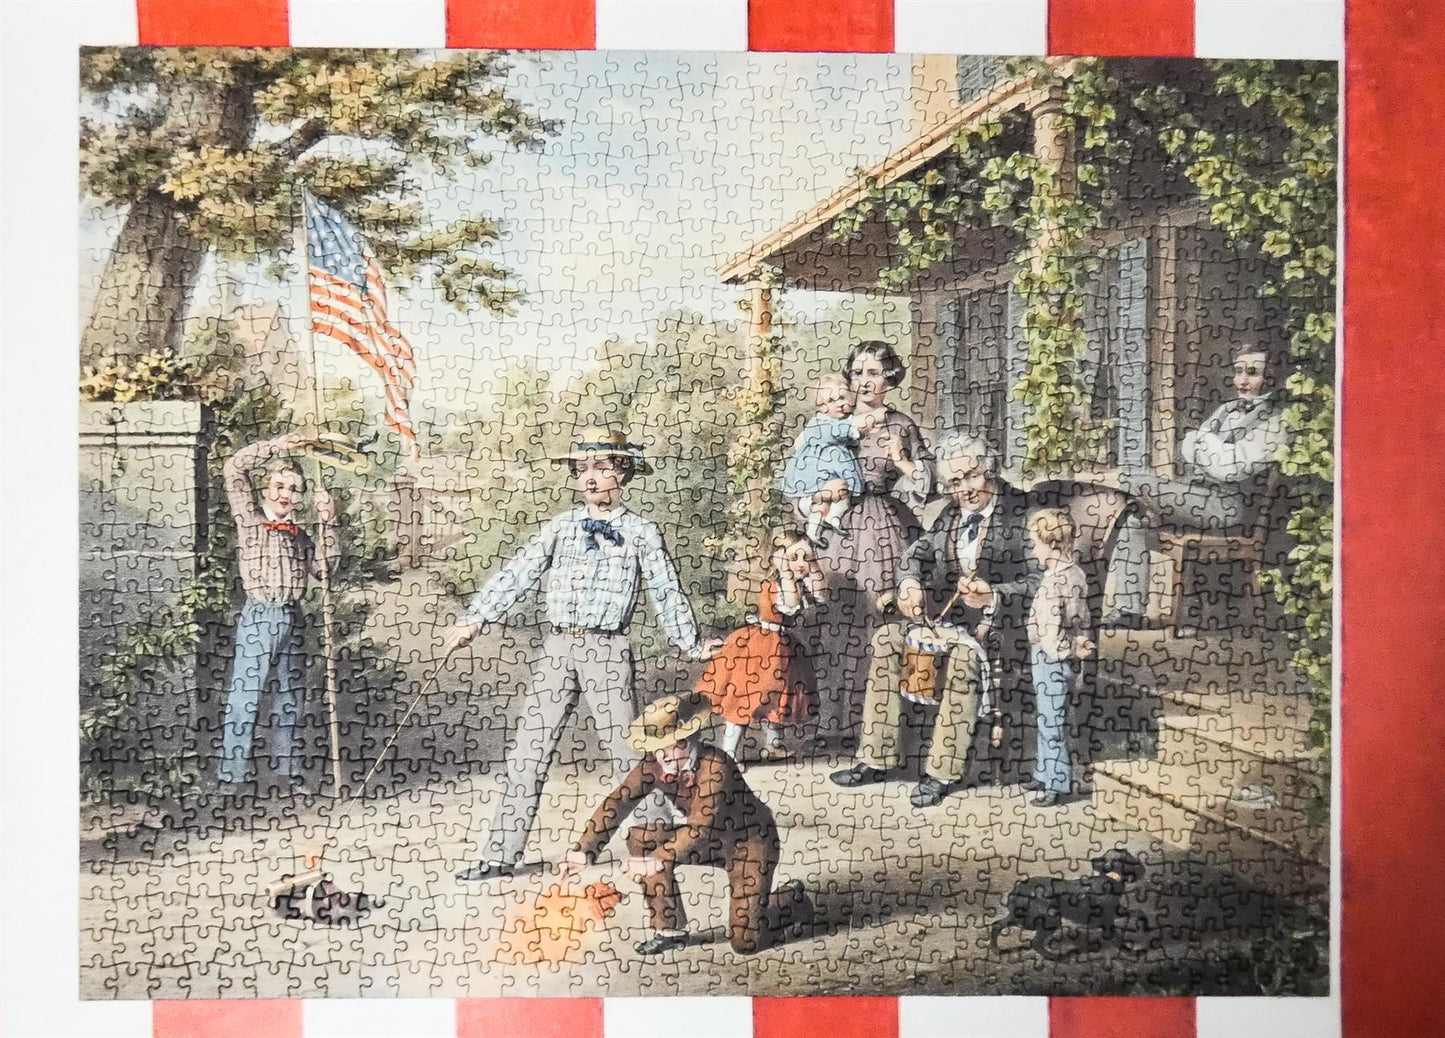 Independence Day 1000 Piece Jigsaw